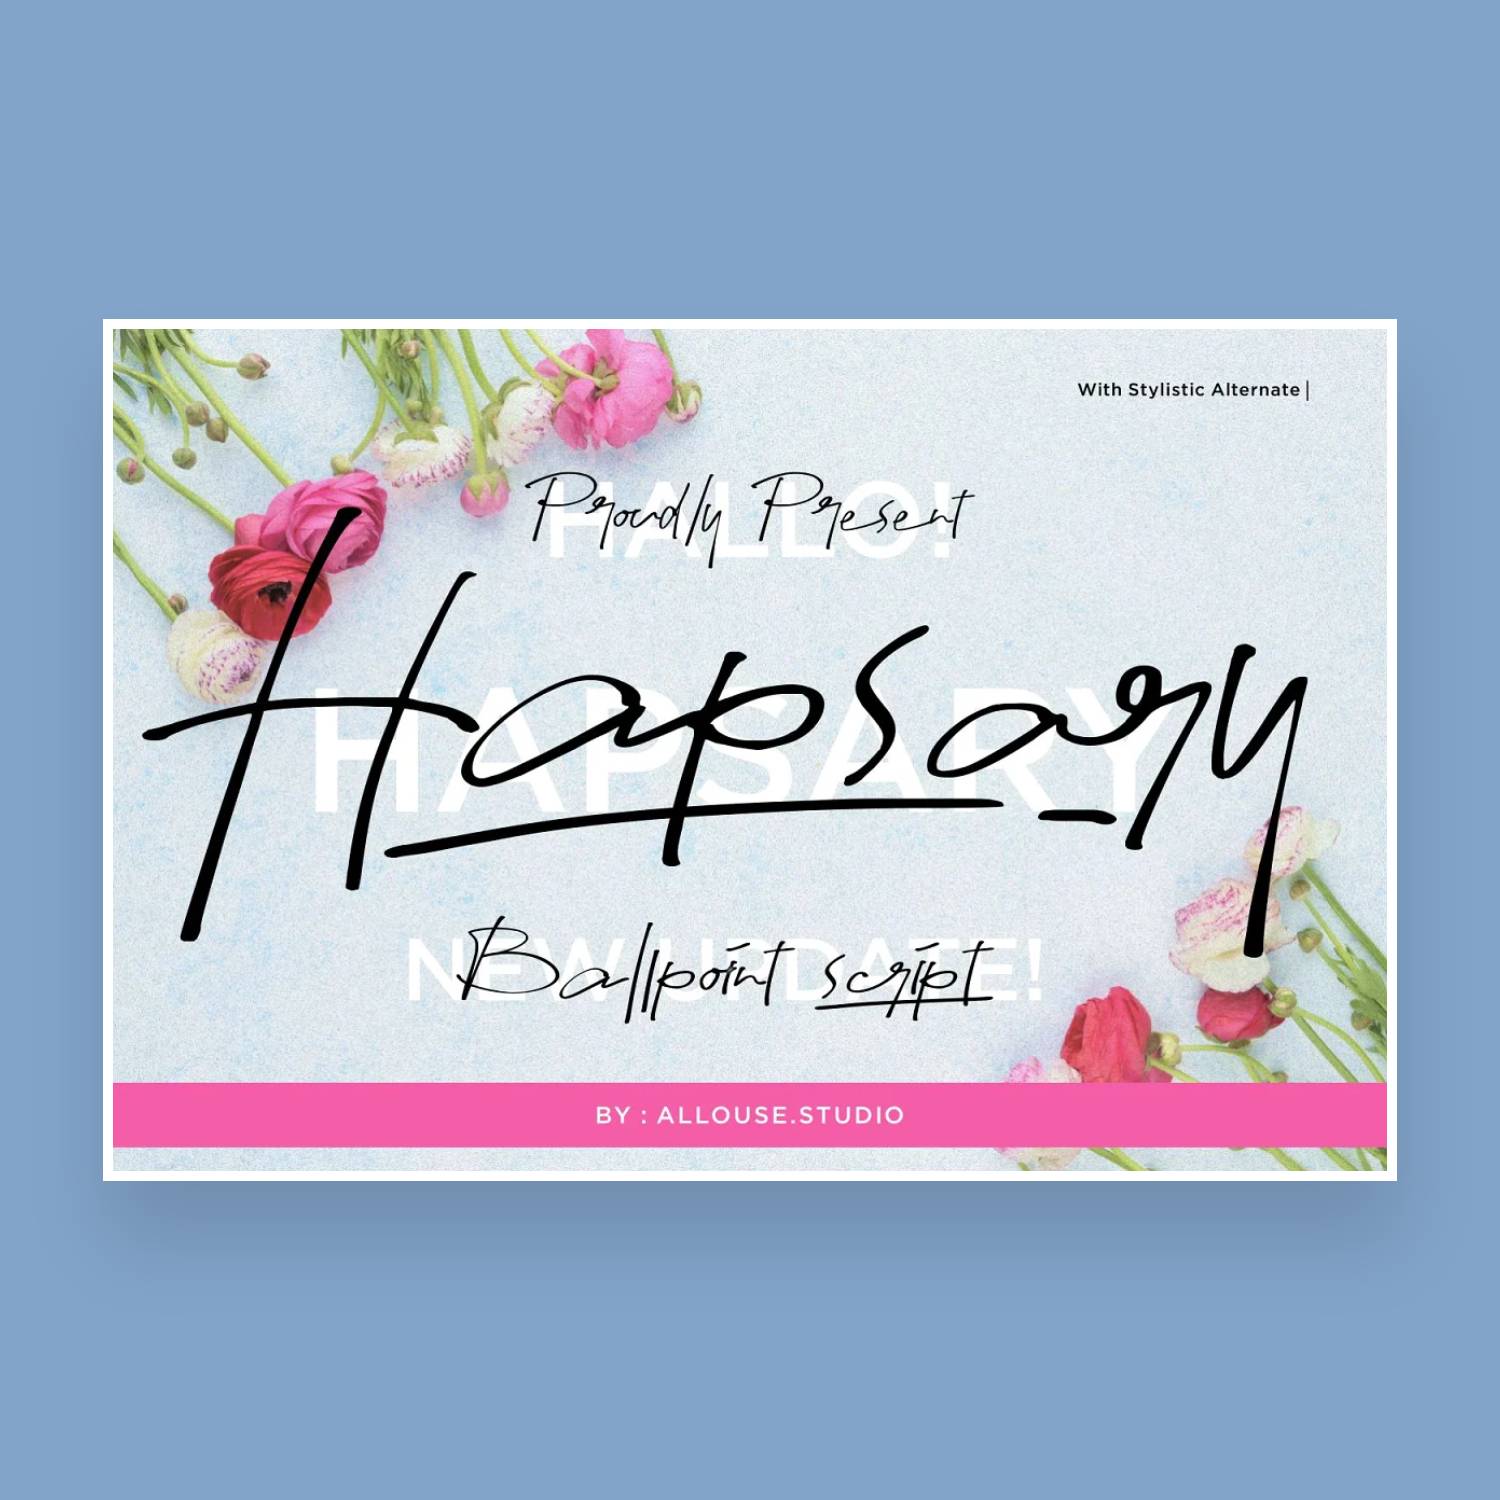 Hapsary font main cover.